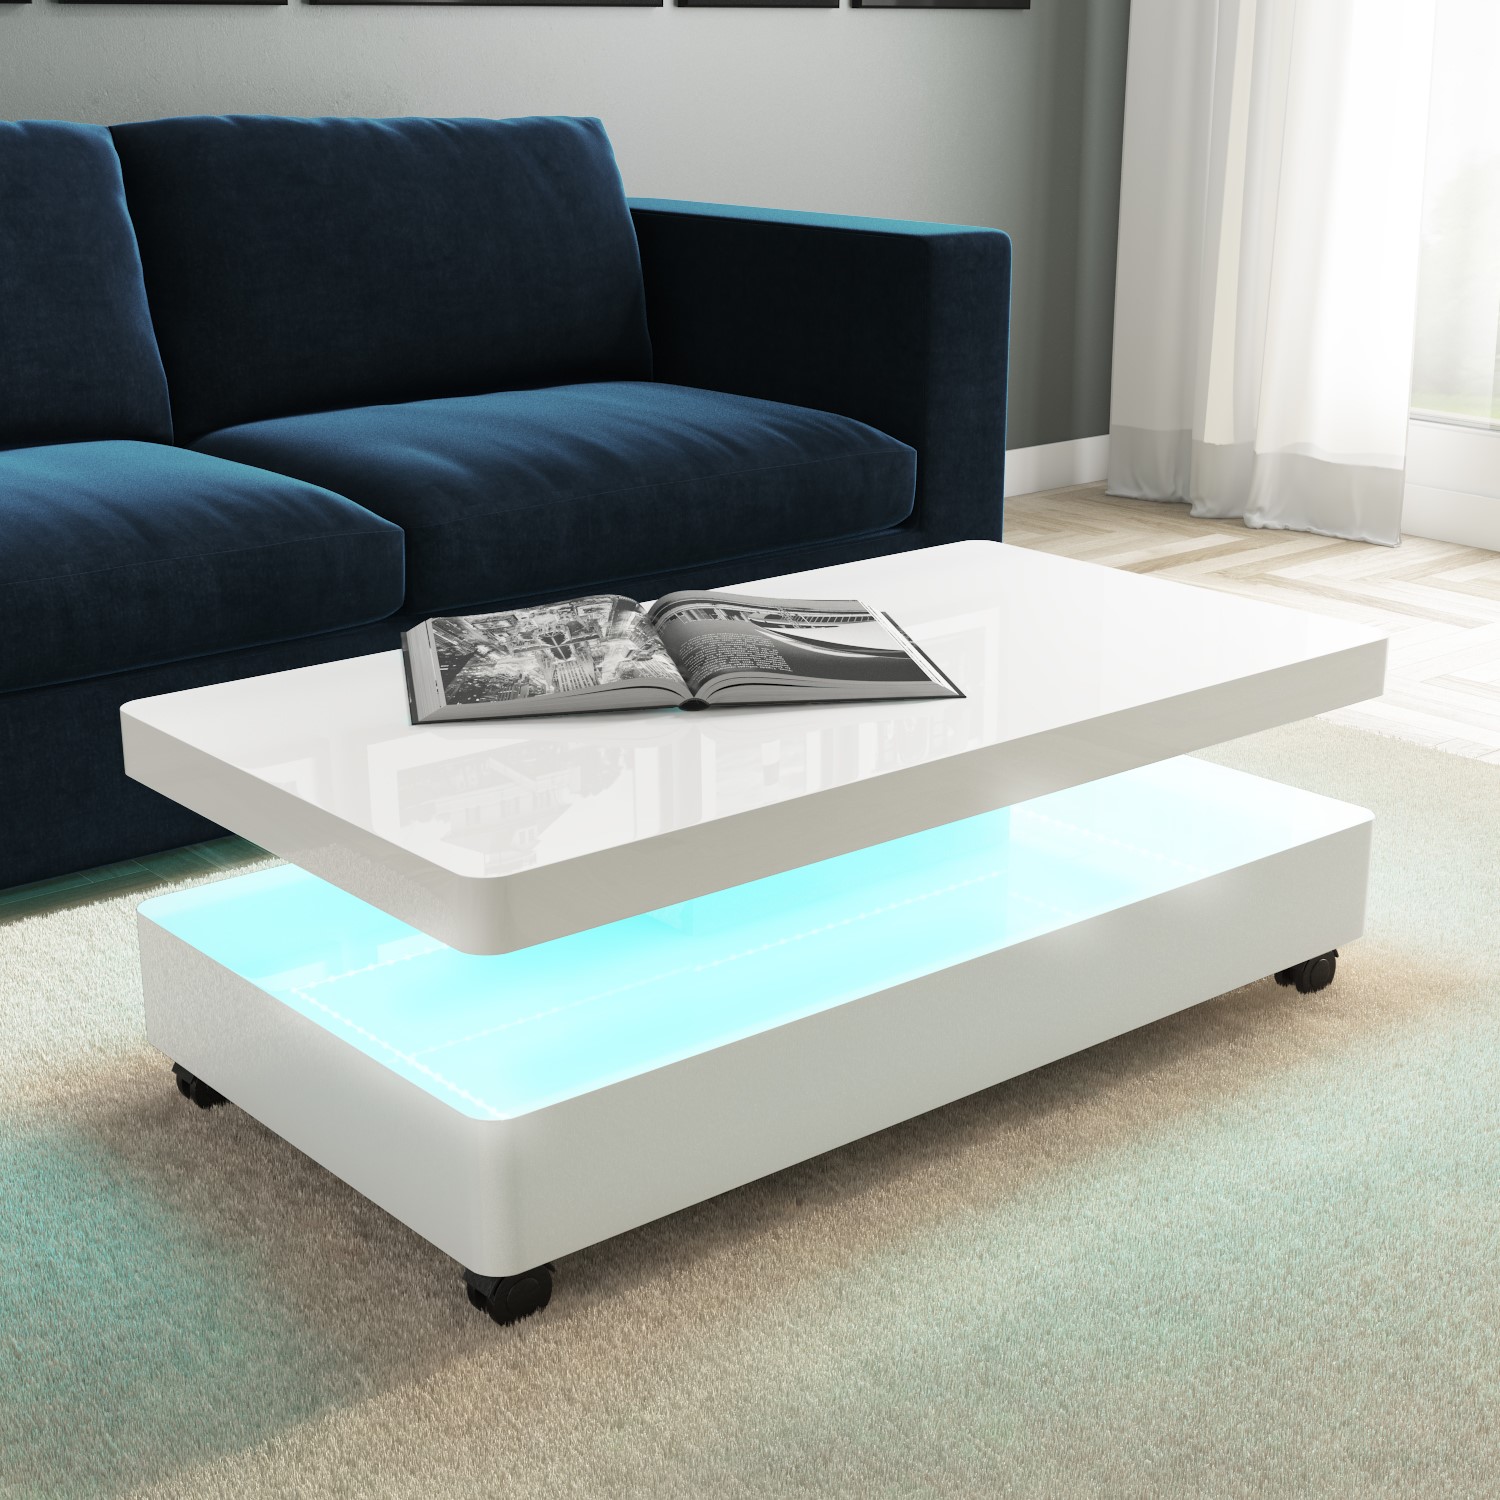 High Gloss White Coffee Table With LED Lighting 5060388562168 eBay